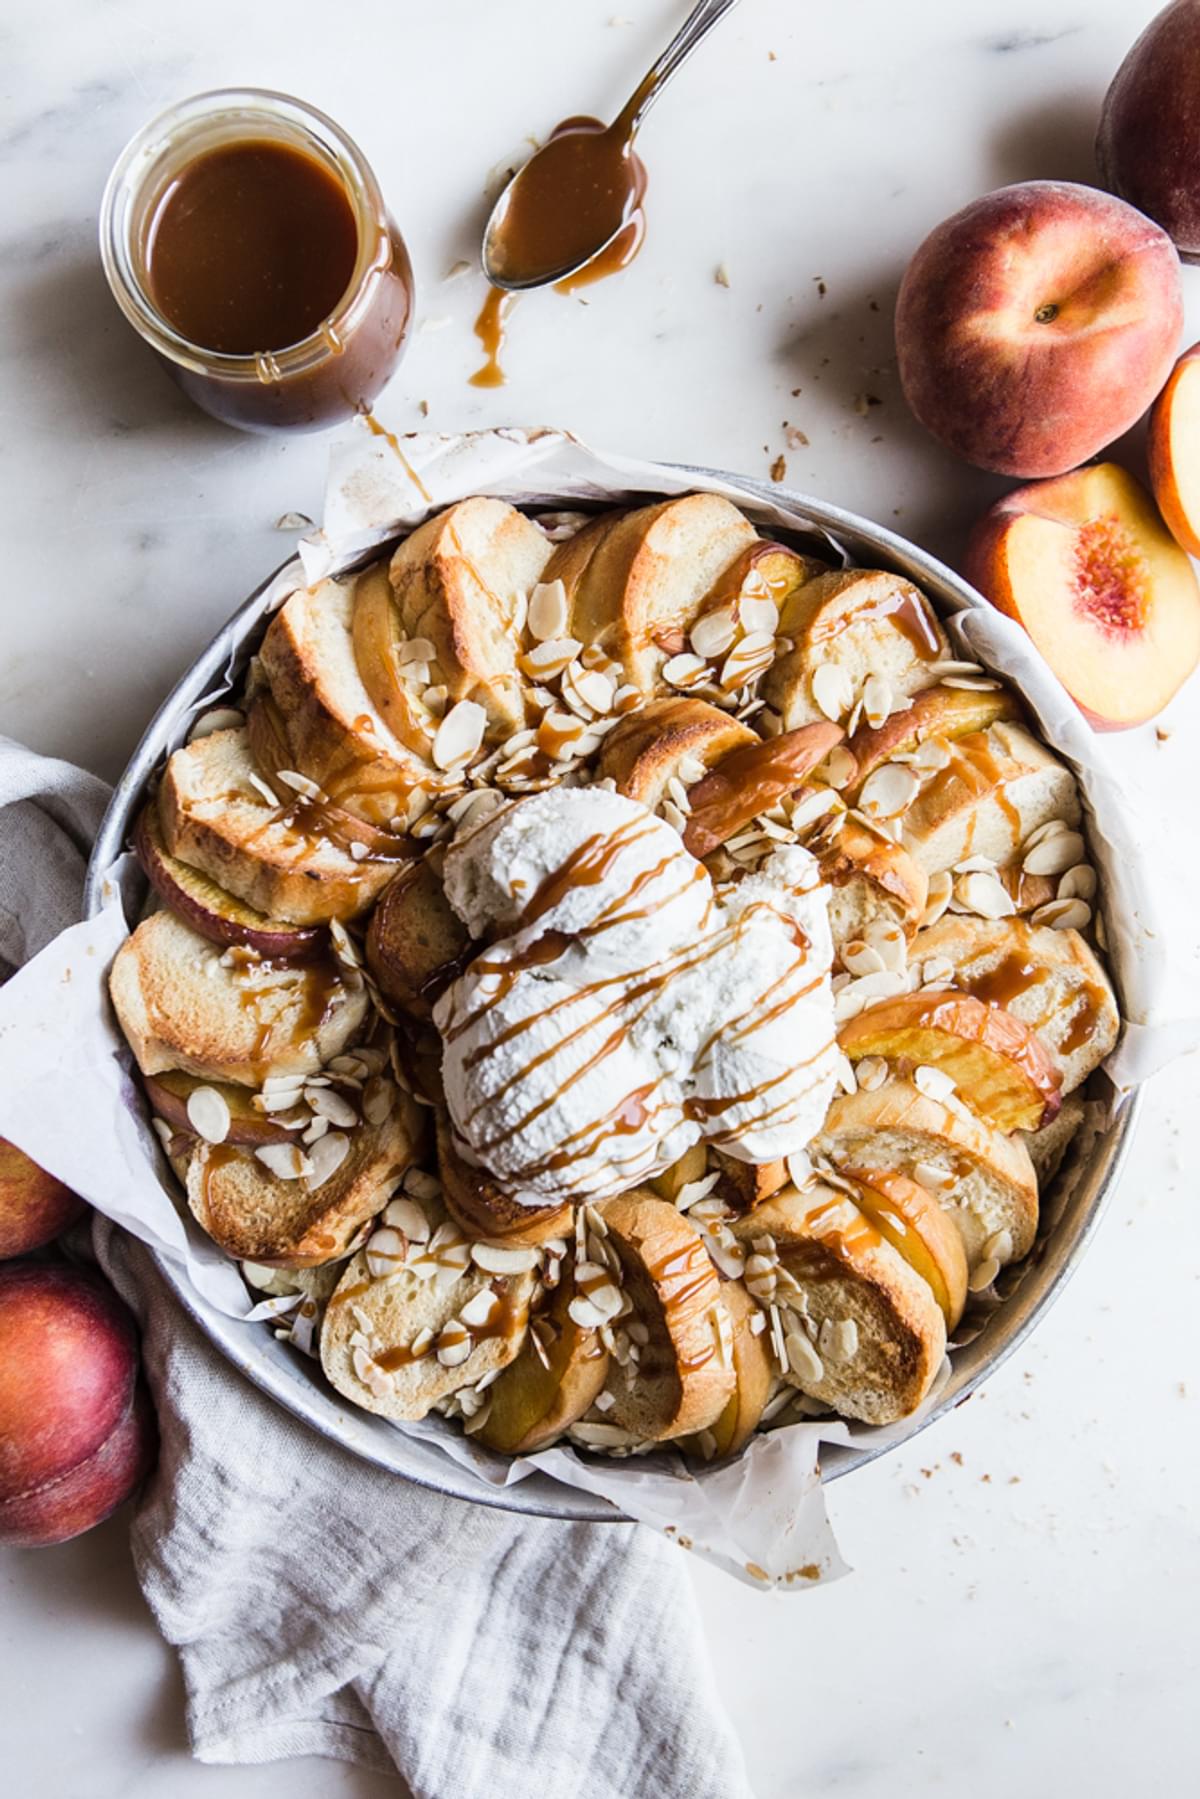 Almond peach bread pudding with caramel sauce